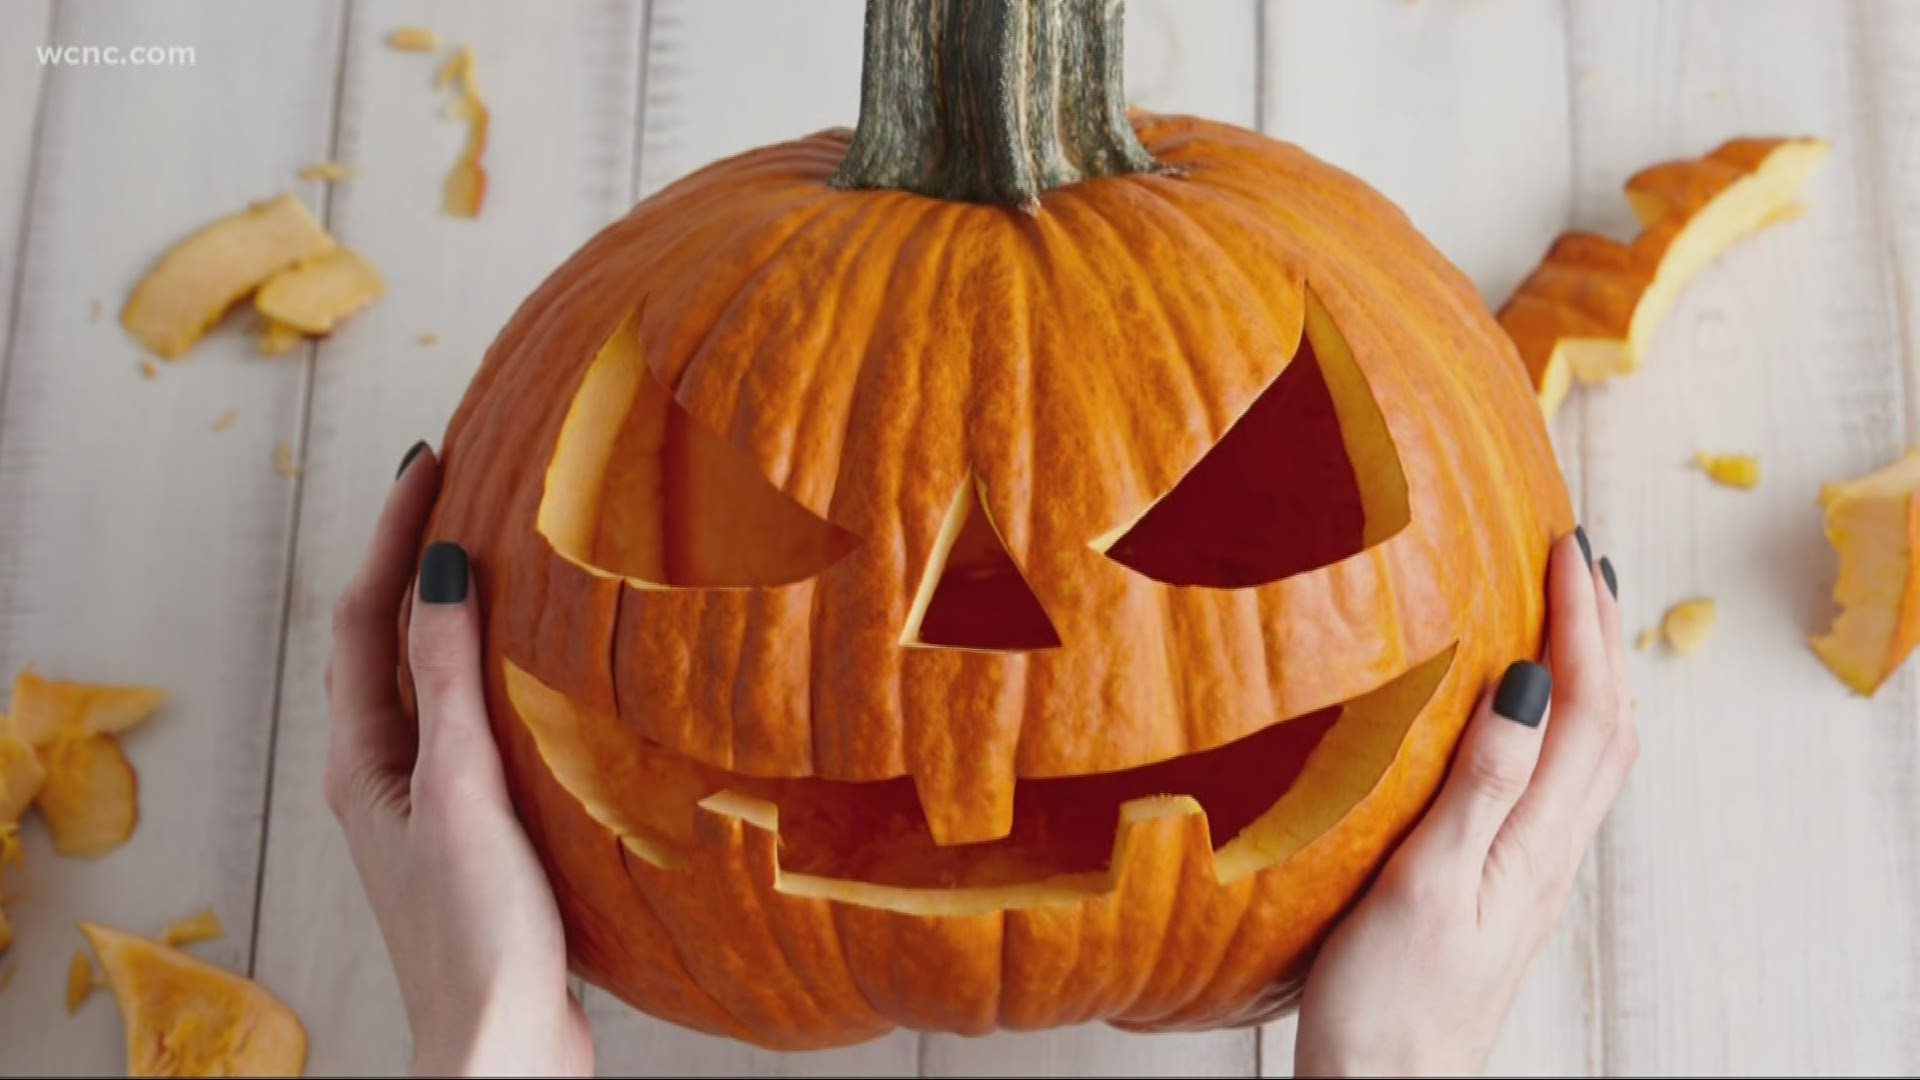 Are your pumpkins looking a little off? Here's what you need to do to keep them looking fresh and clean through Halloween and the fall.